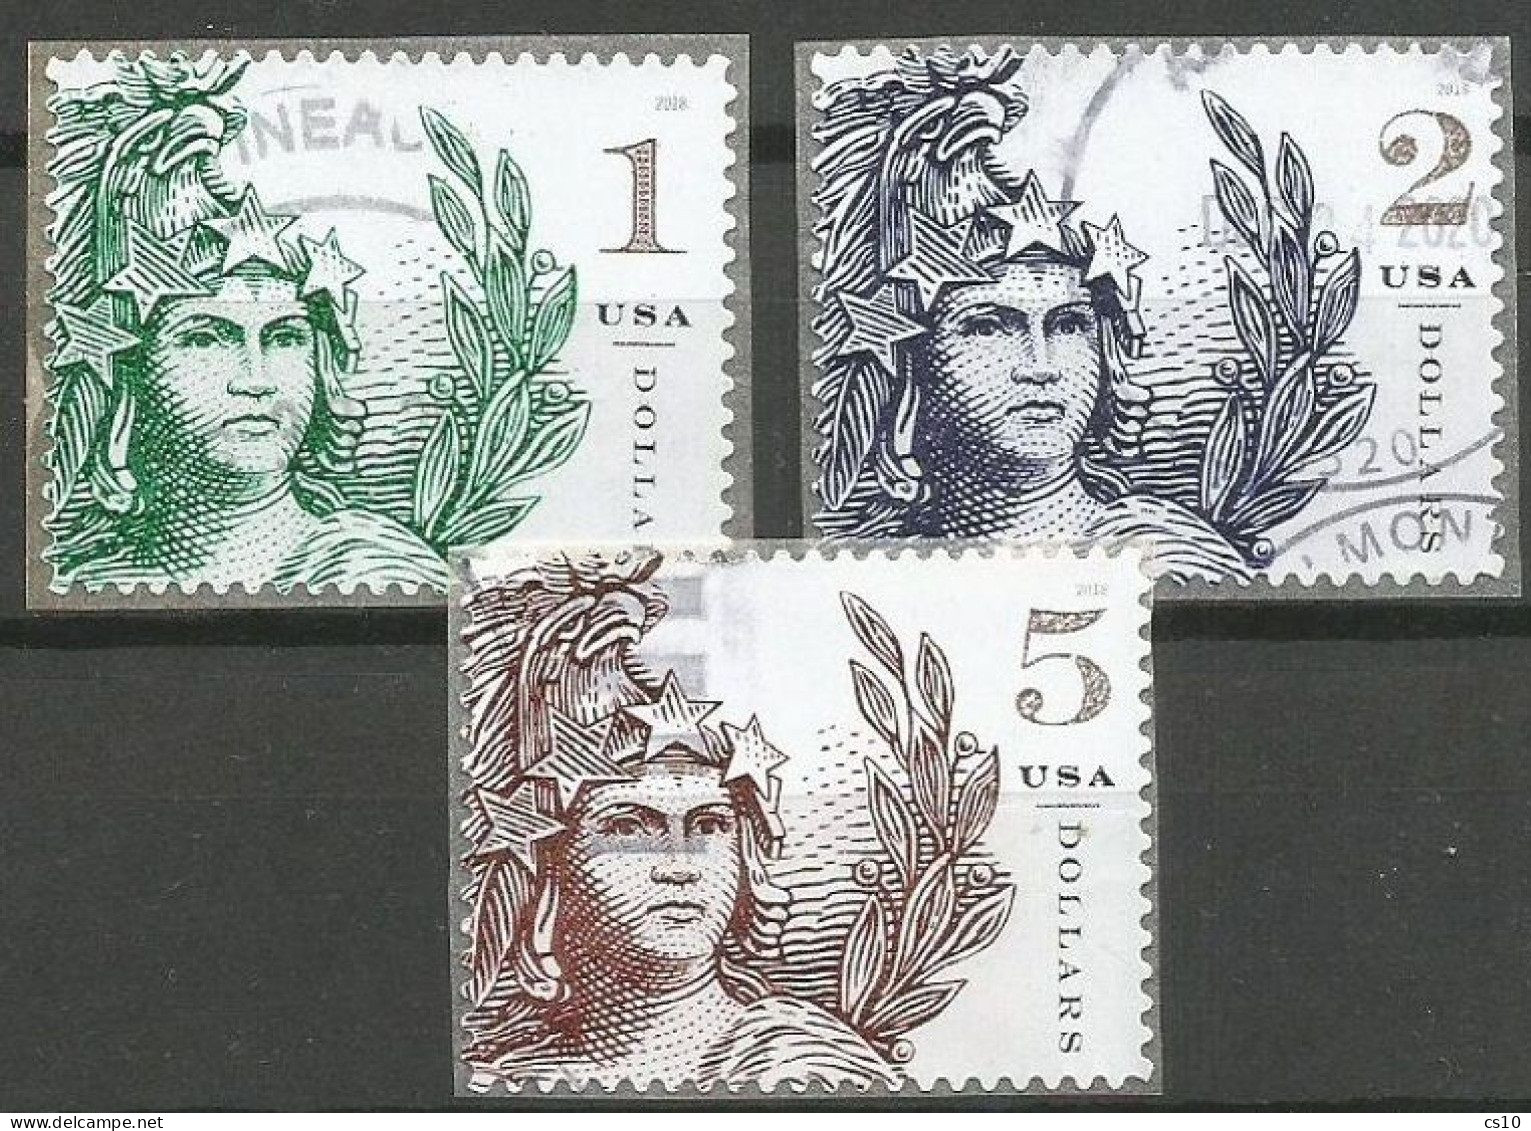 USA 2018 Statue Of Liberty - Freedom High Values $ 1-2-5 SC.# 5295/97 - Cpl 3v Set In VFU Condition - Collections